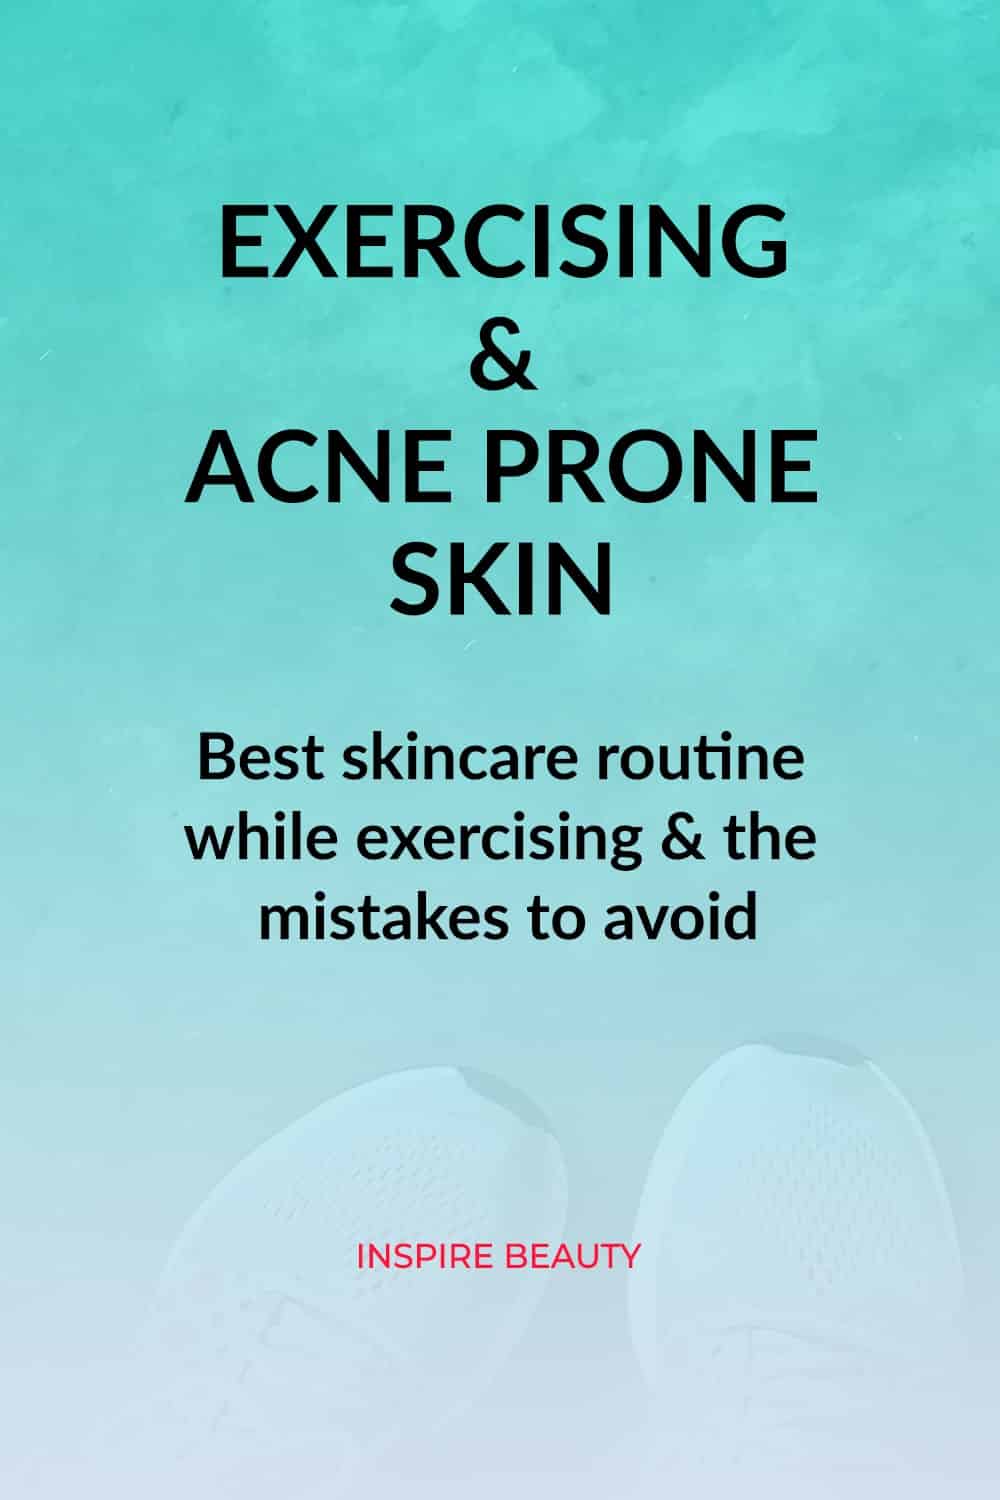 Find out best skincare routine before and after exercising for acne prone skin